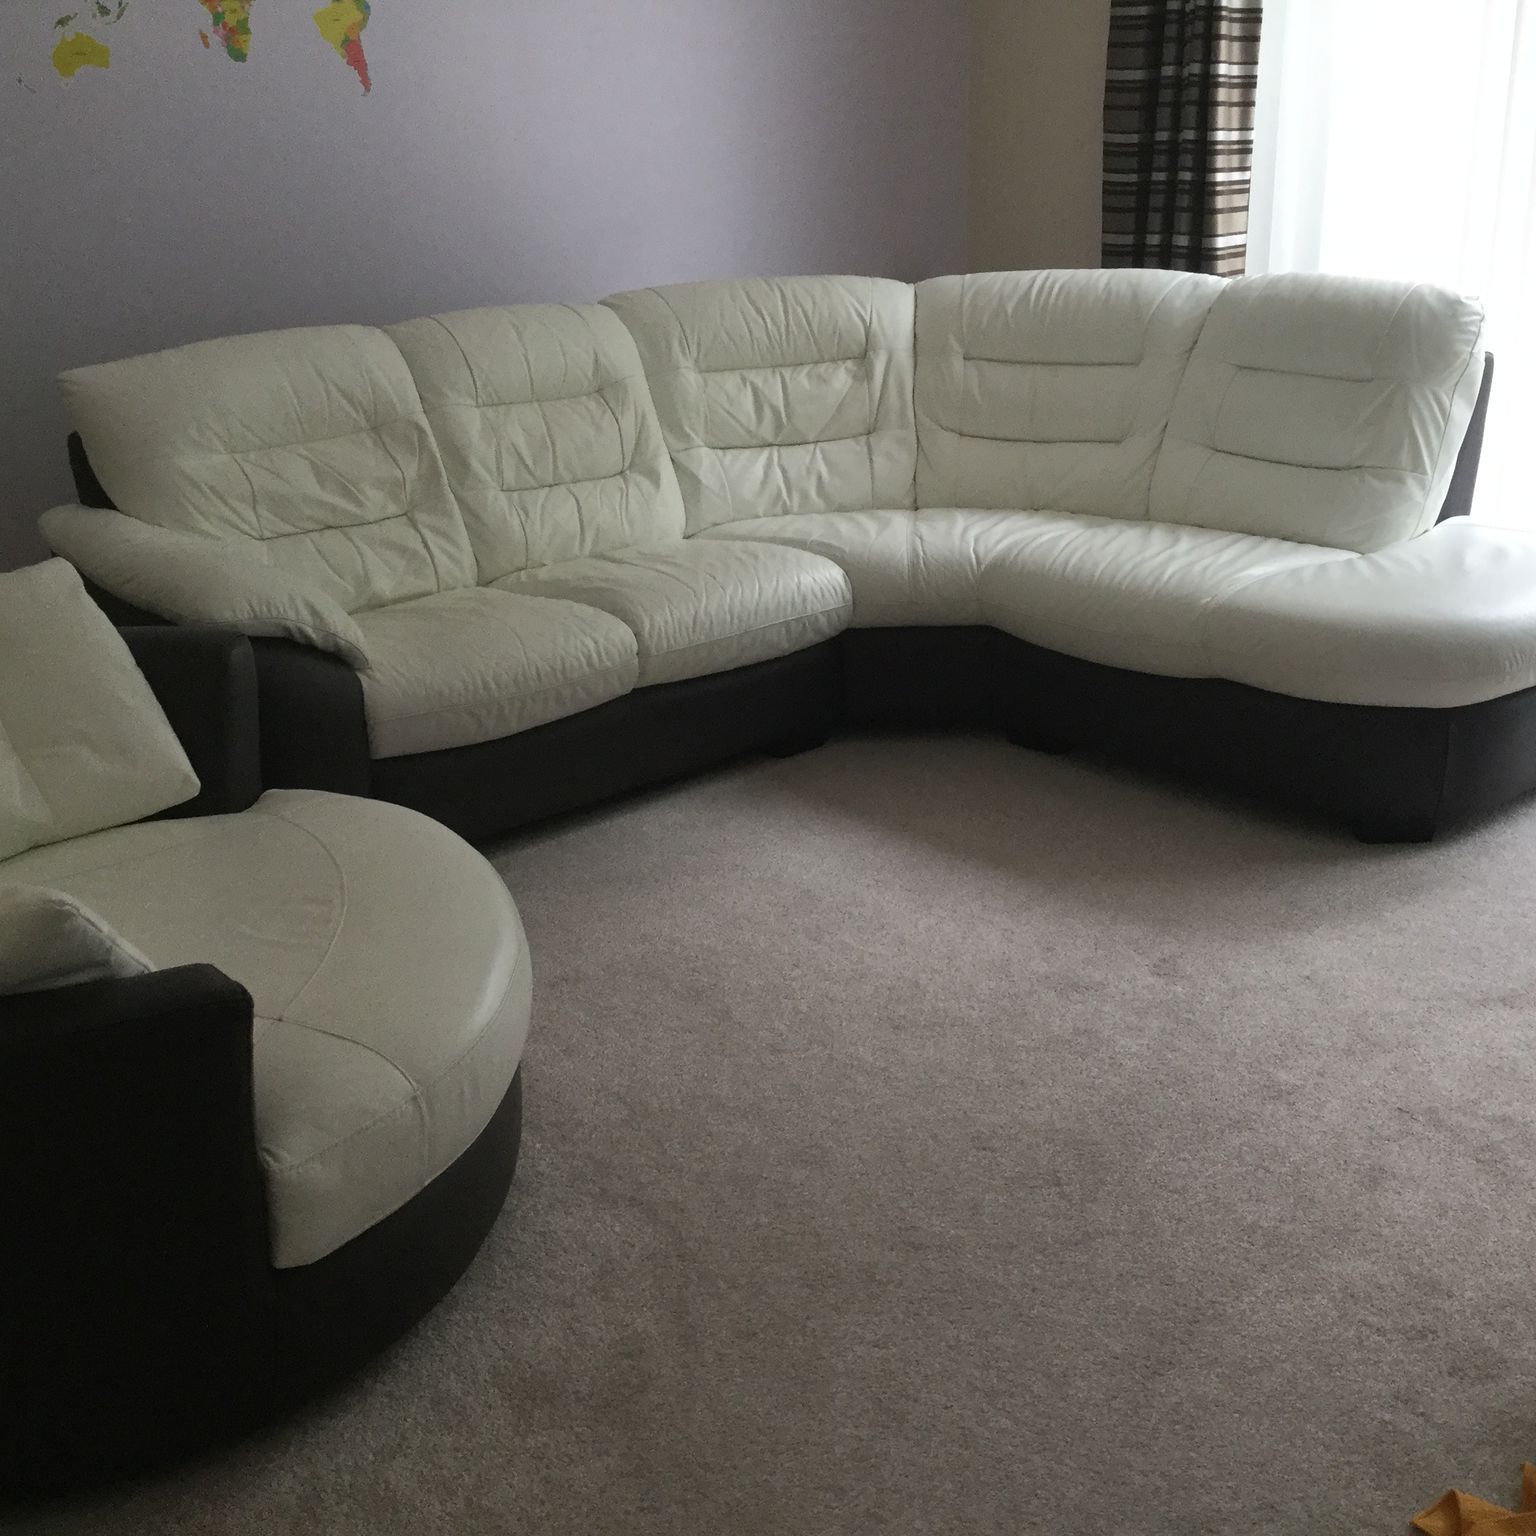 Current Corner Sofa And Swivel Chairs With Regard To Used Dfs Leather Corner Sofa And Swivel Chair In G61 Milngavie For (View 18 of 20)